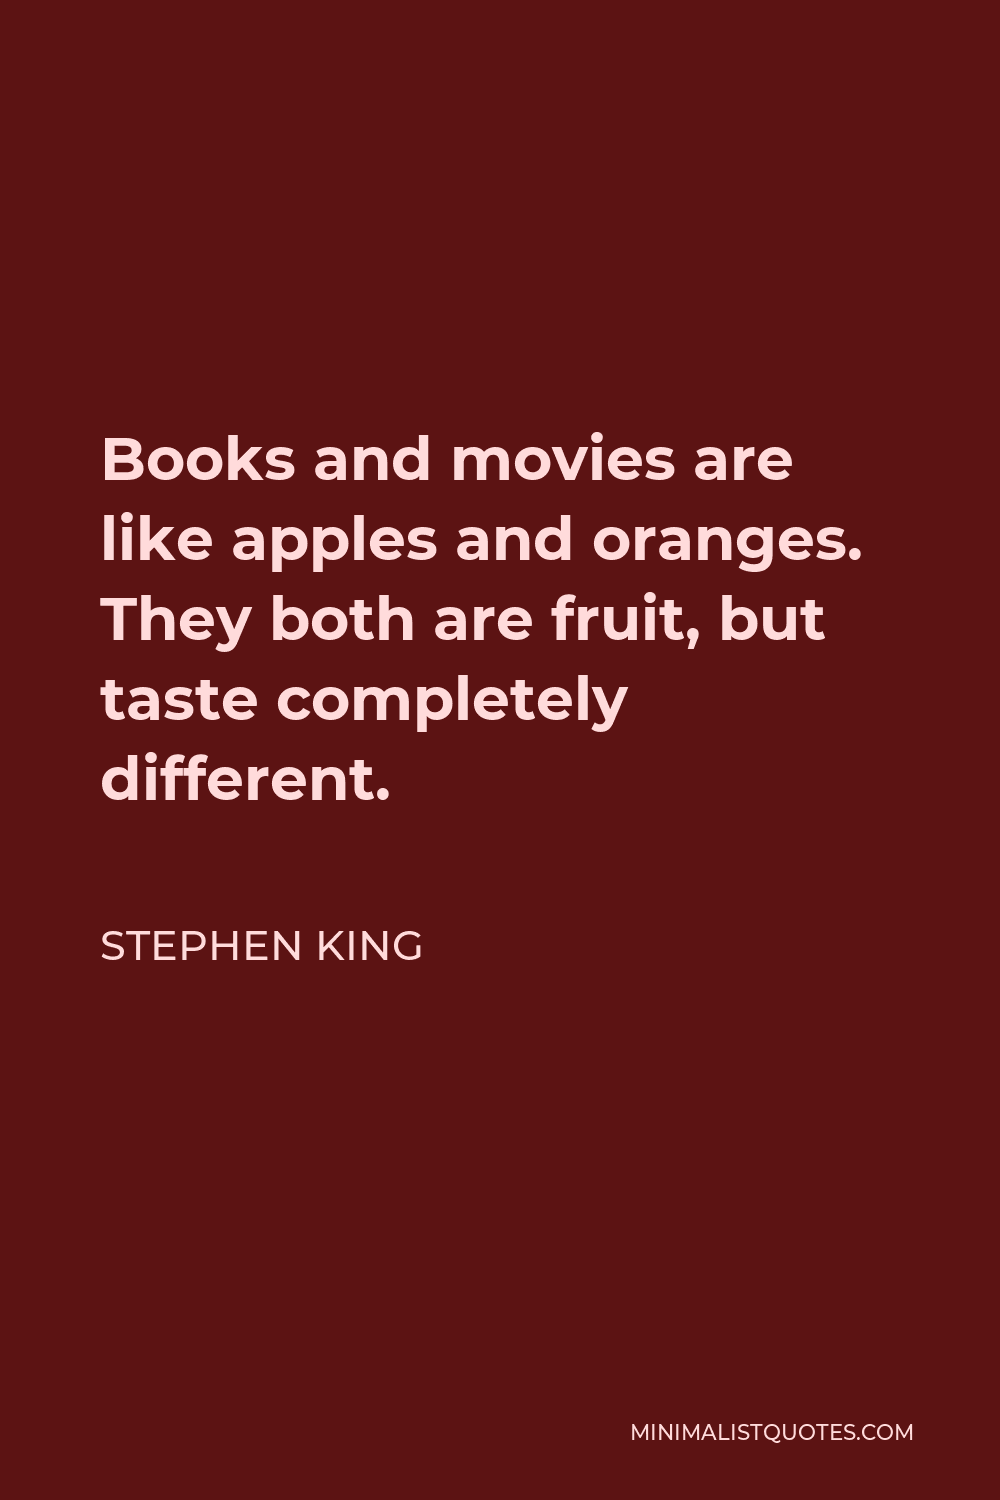 Stephen King Quote - Books and movies are like apples and oranges. They both are fruit, but taste completely different.